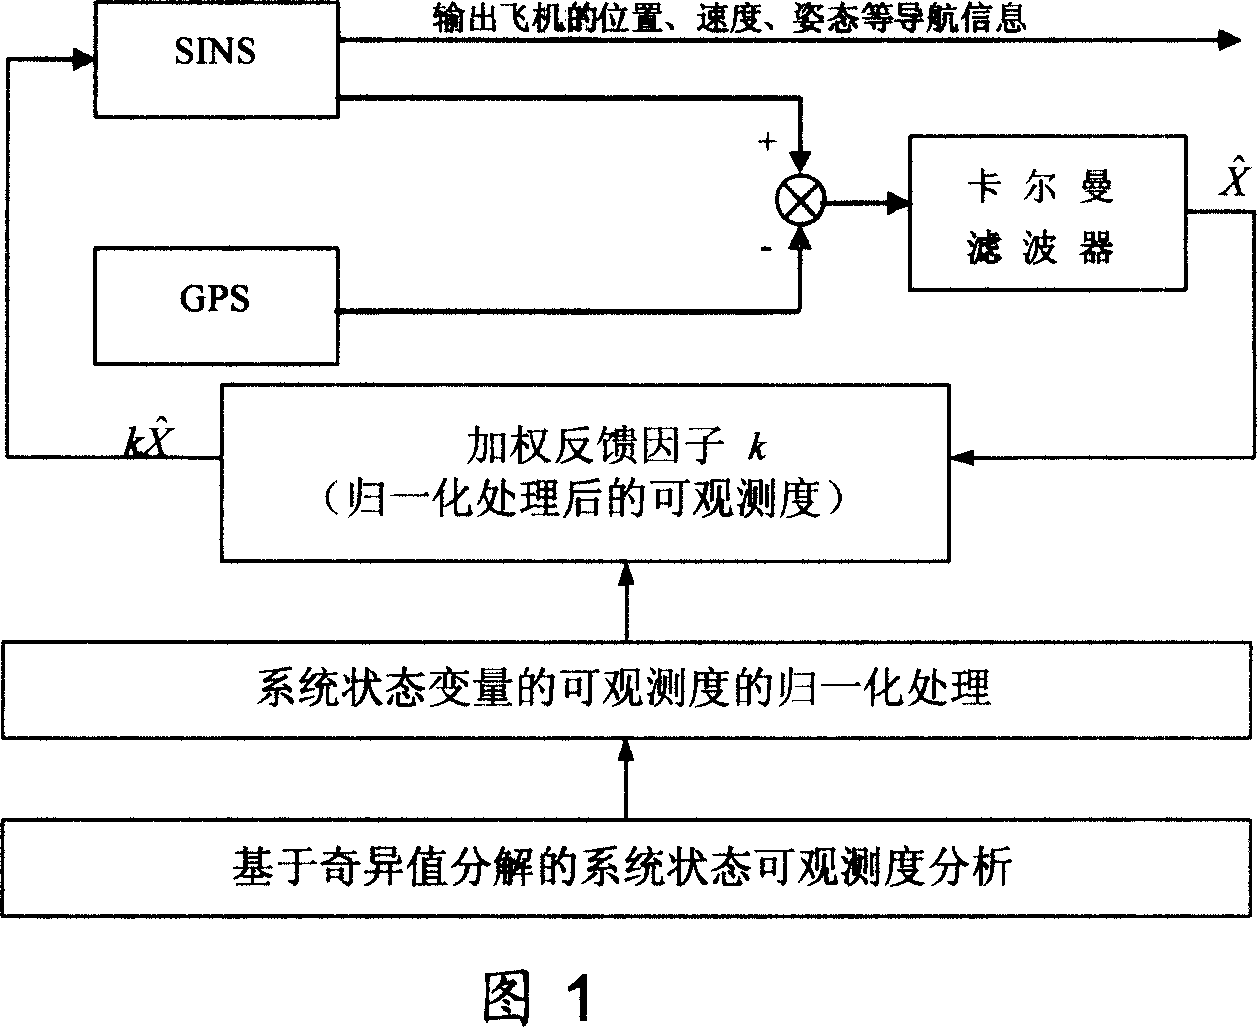 Self adaptive weighting feedback correcting filter method of SINS/GPS combined navigation system